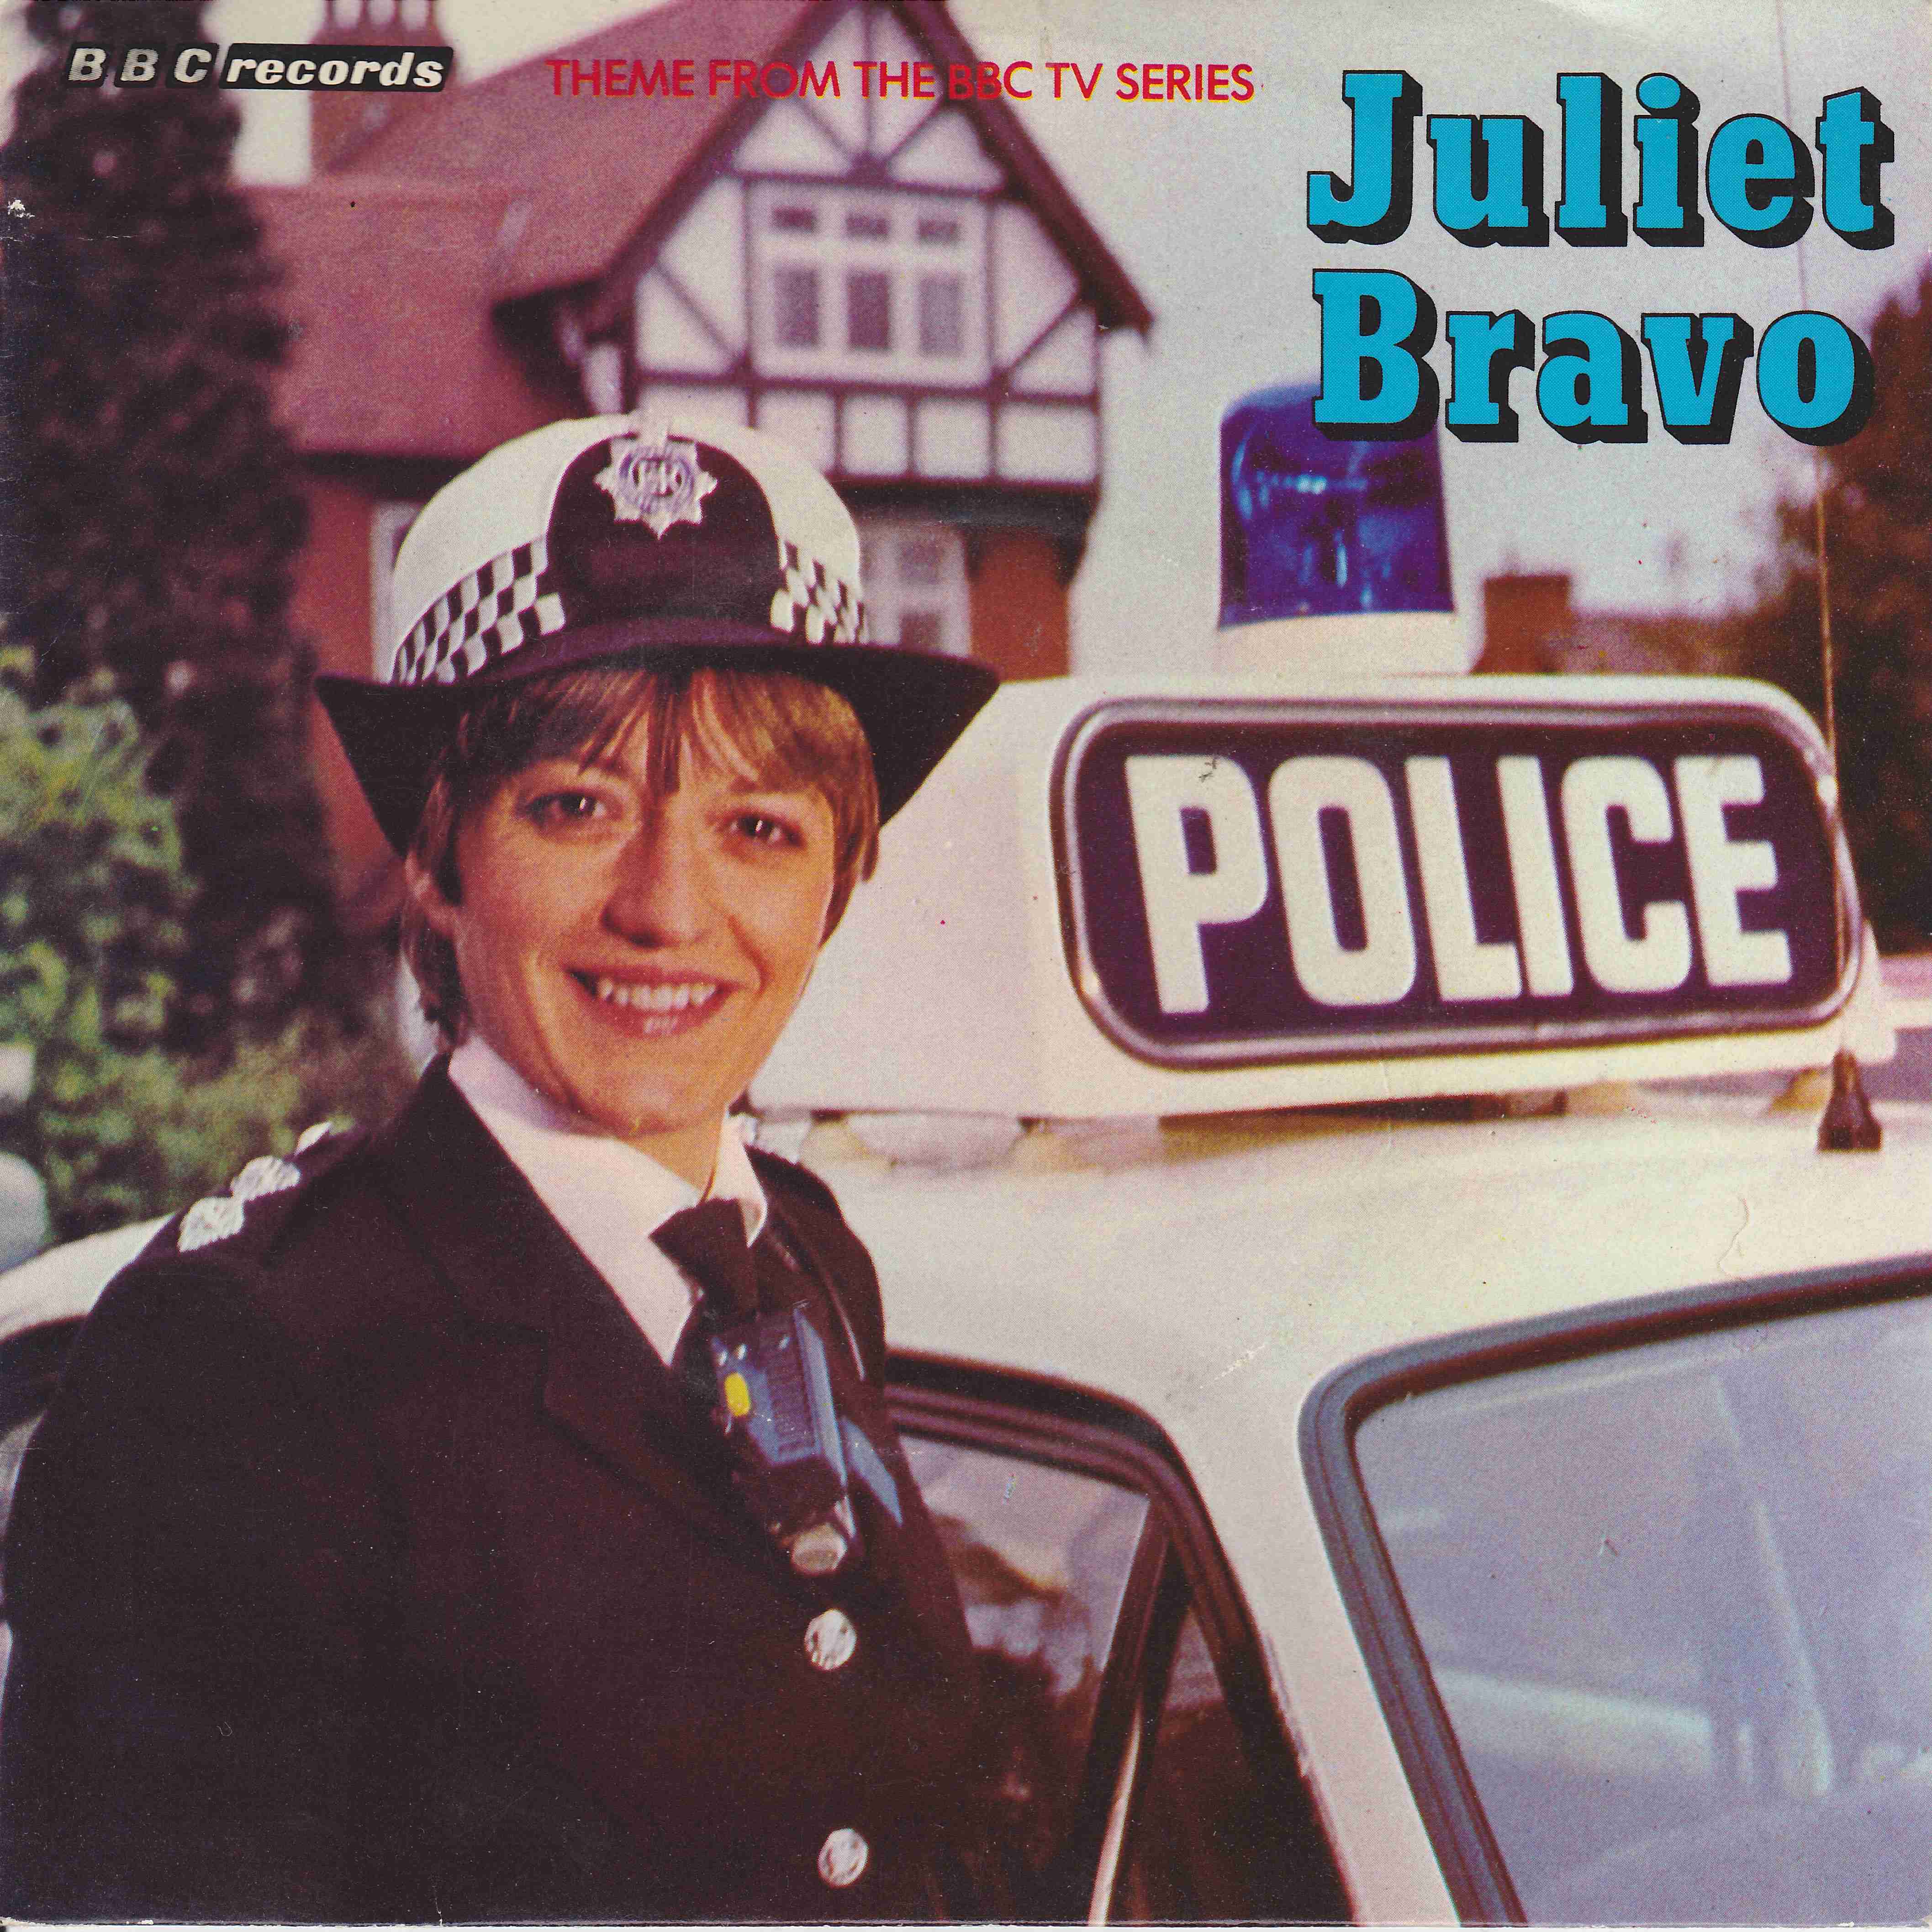 Picture of RESL 84 Juliet bravo by artist J. S. Bach / Arr. Derek Goom from the BBC singles - Records and Tapes library